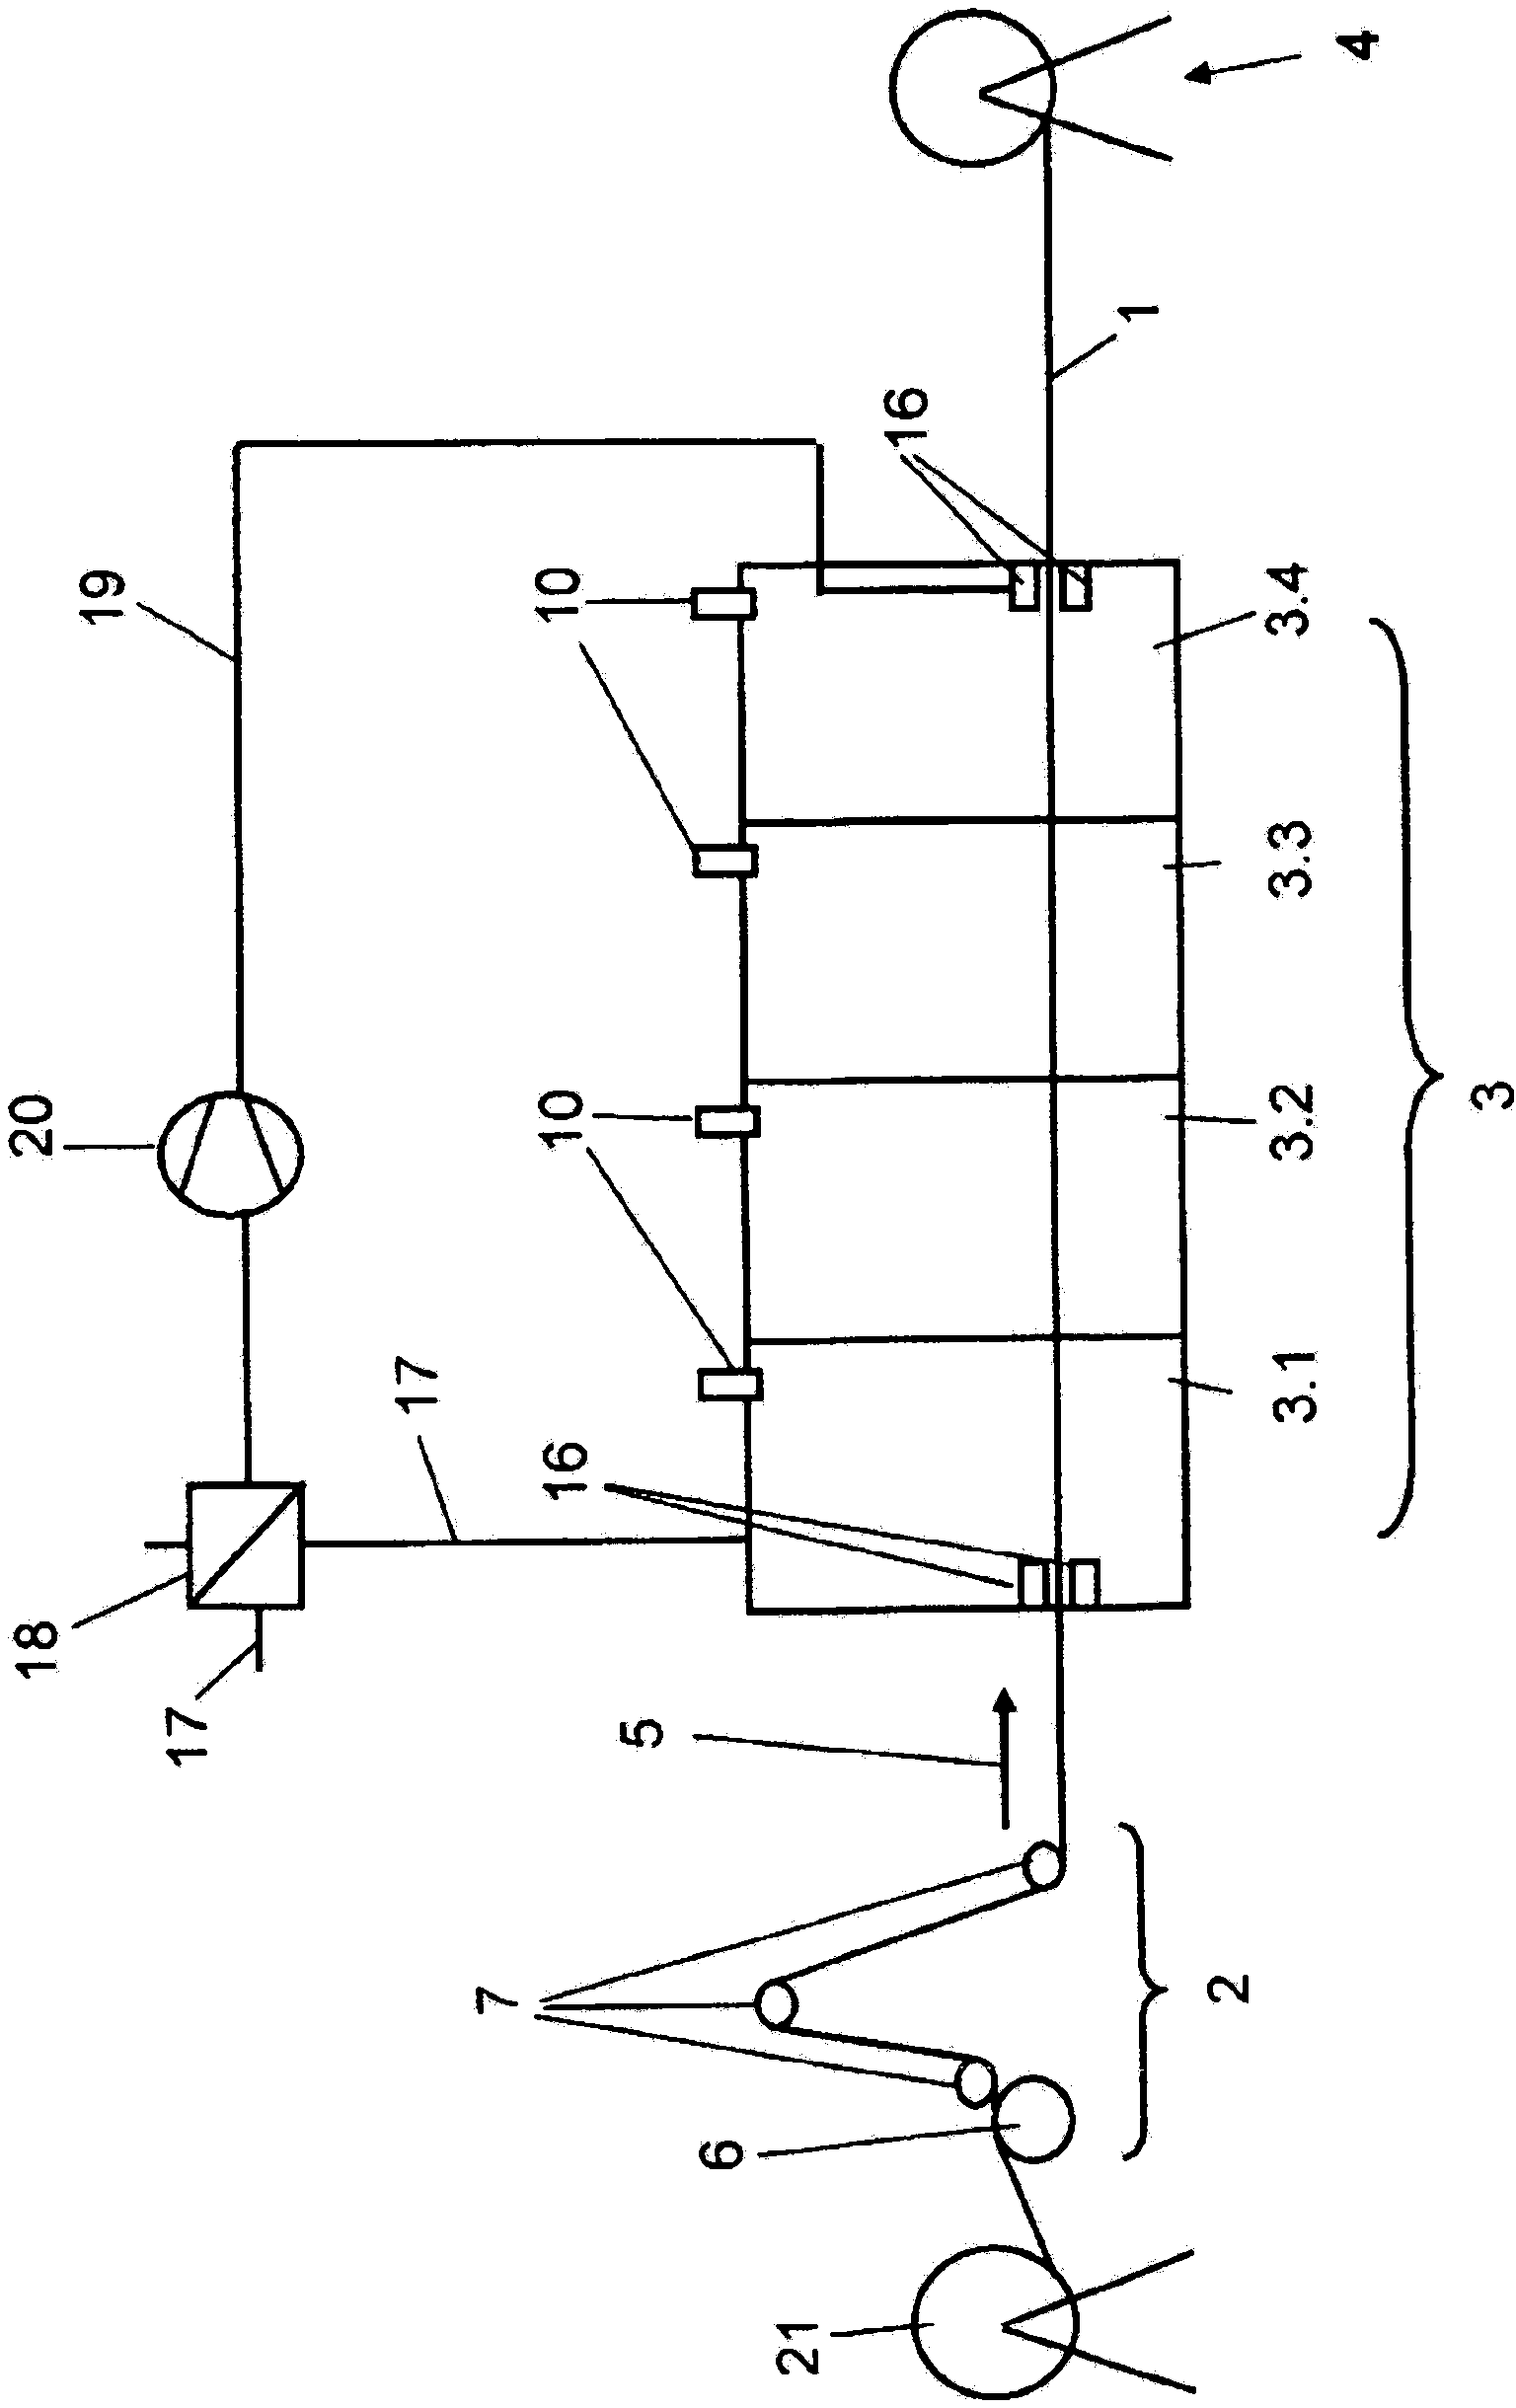 Method and system for impregnating and drying a continuous paper web